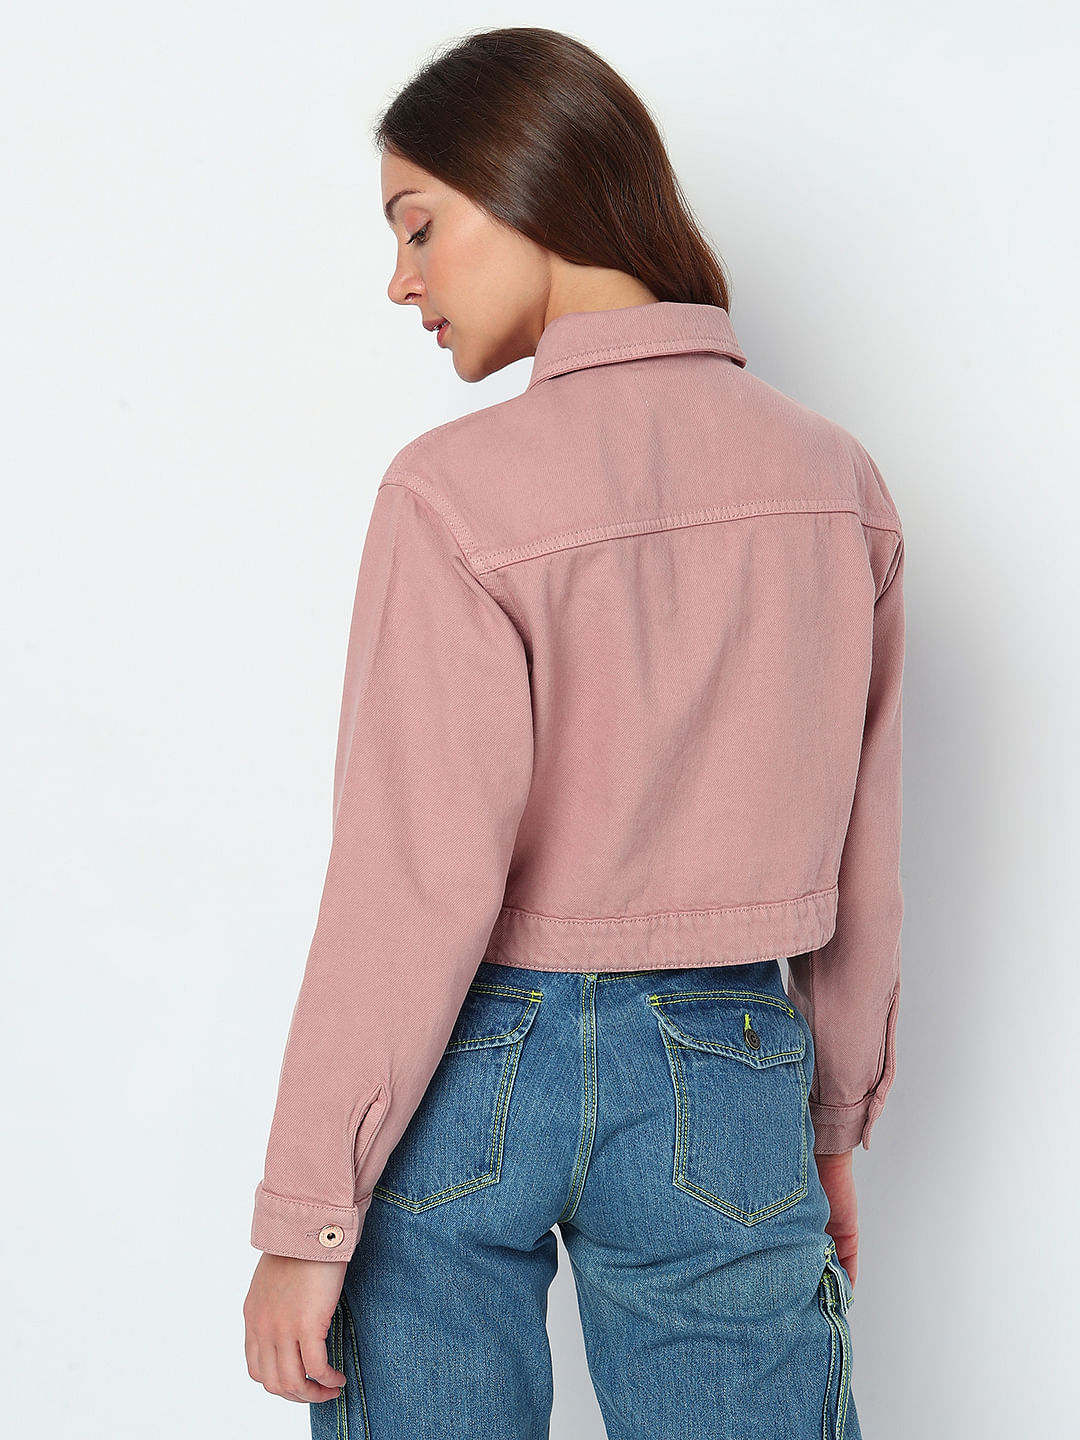 It's Your Choice Black Acid Washed Cropped Denim Jacket FINAL SALE – Pink  Lily